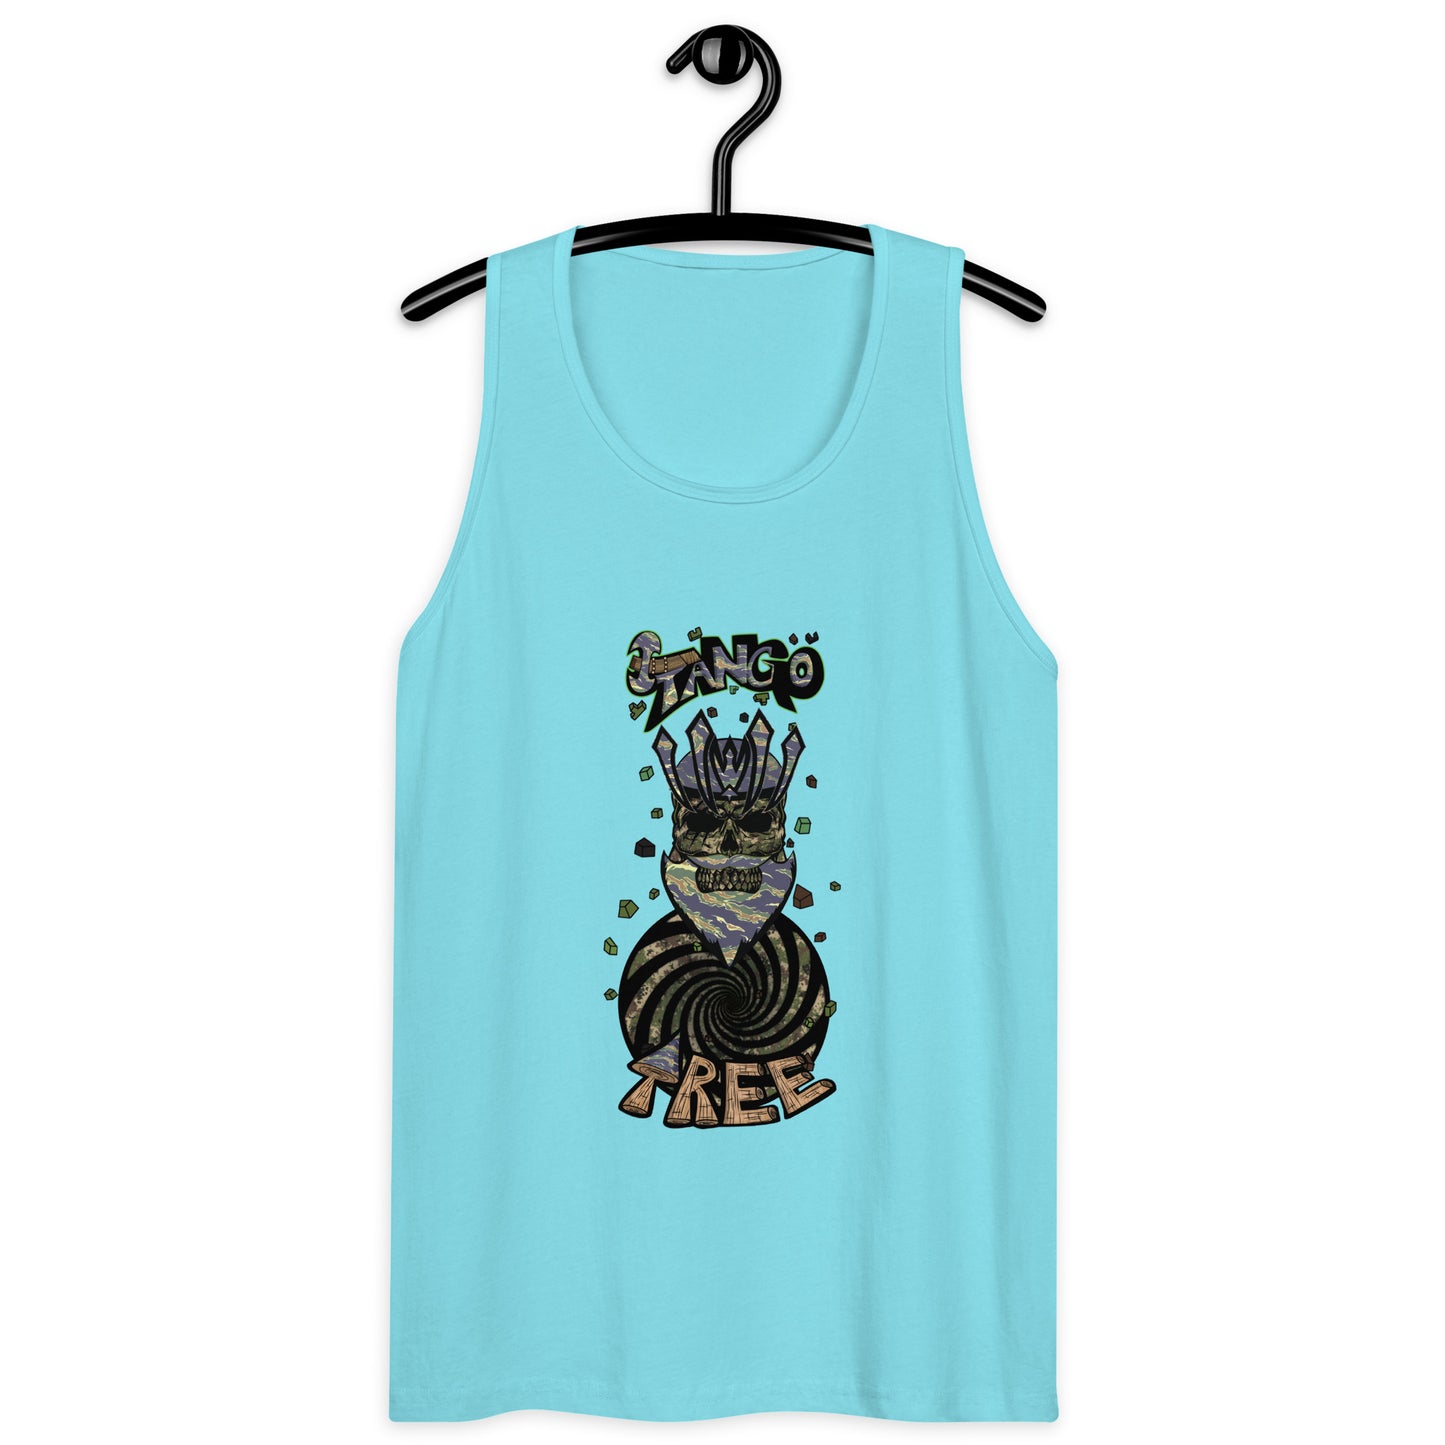 Heritage Men’s premium tank top "King Of The Vortex" Tiger Stripe Can't See Me Edition